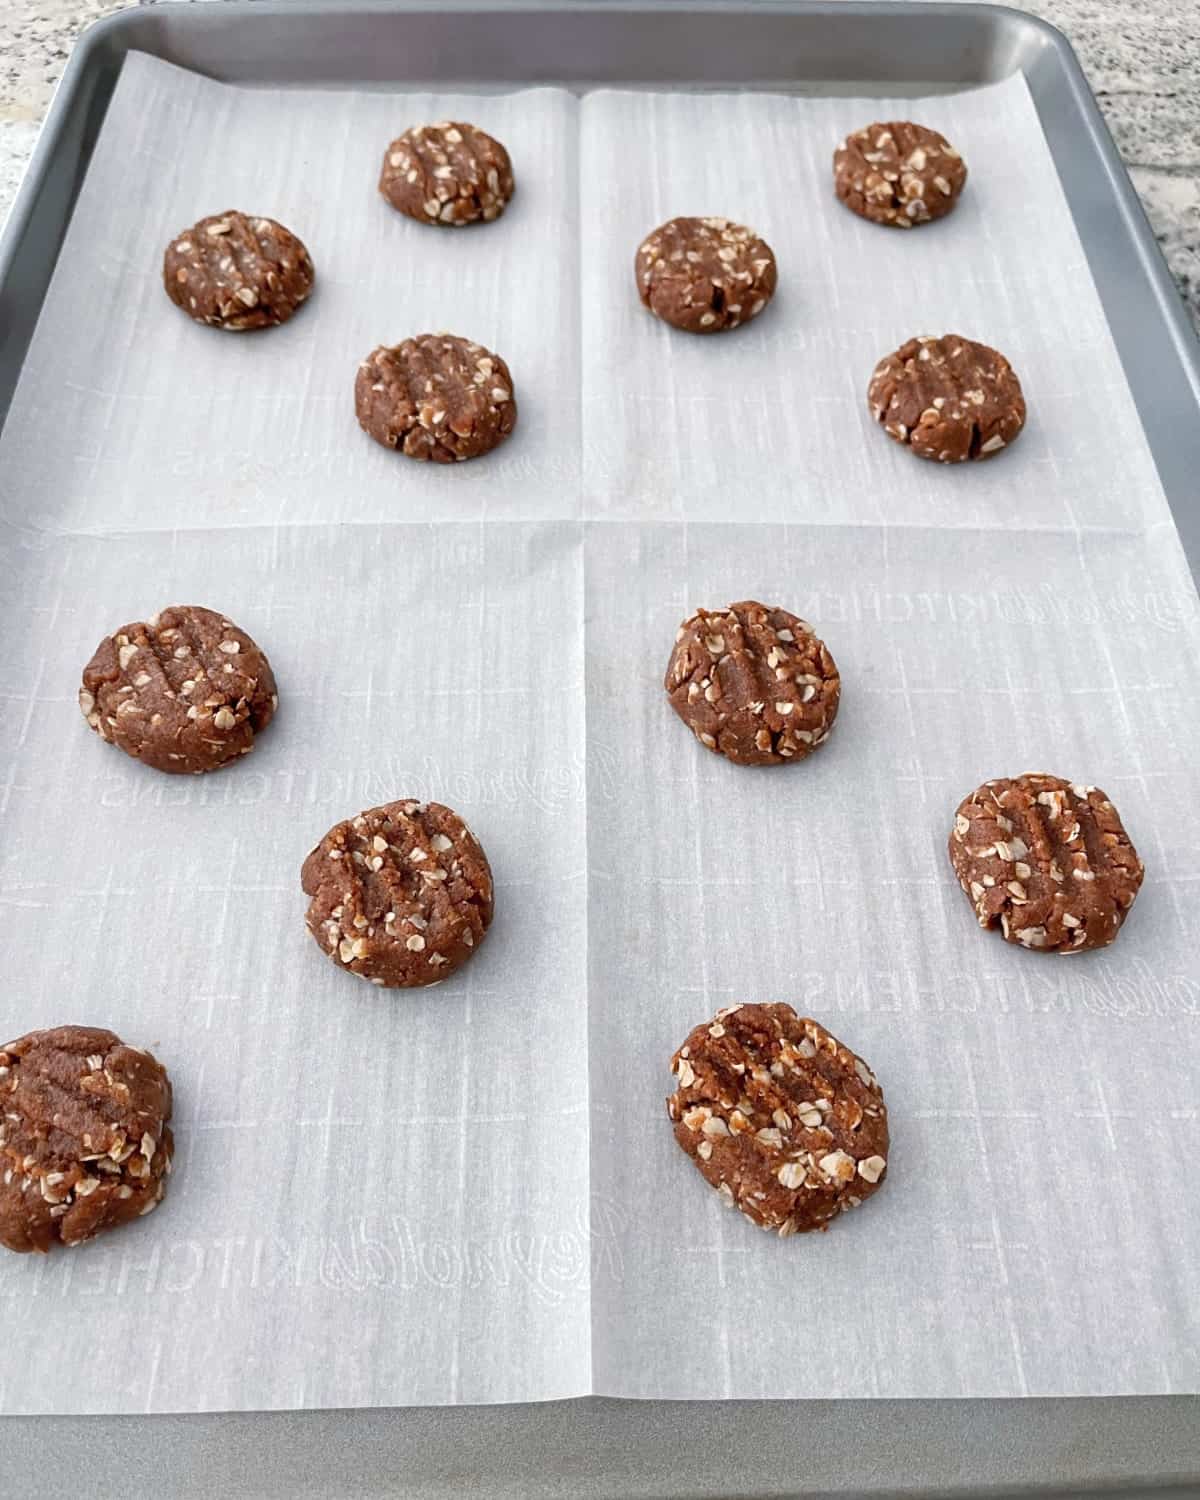 Unbaked Coconut Almond Butter Cookies on a parchment lined baking sheet.